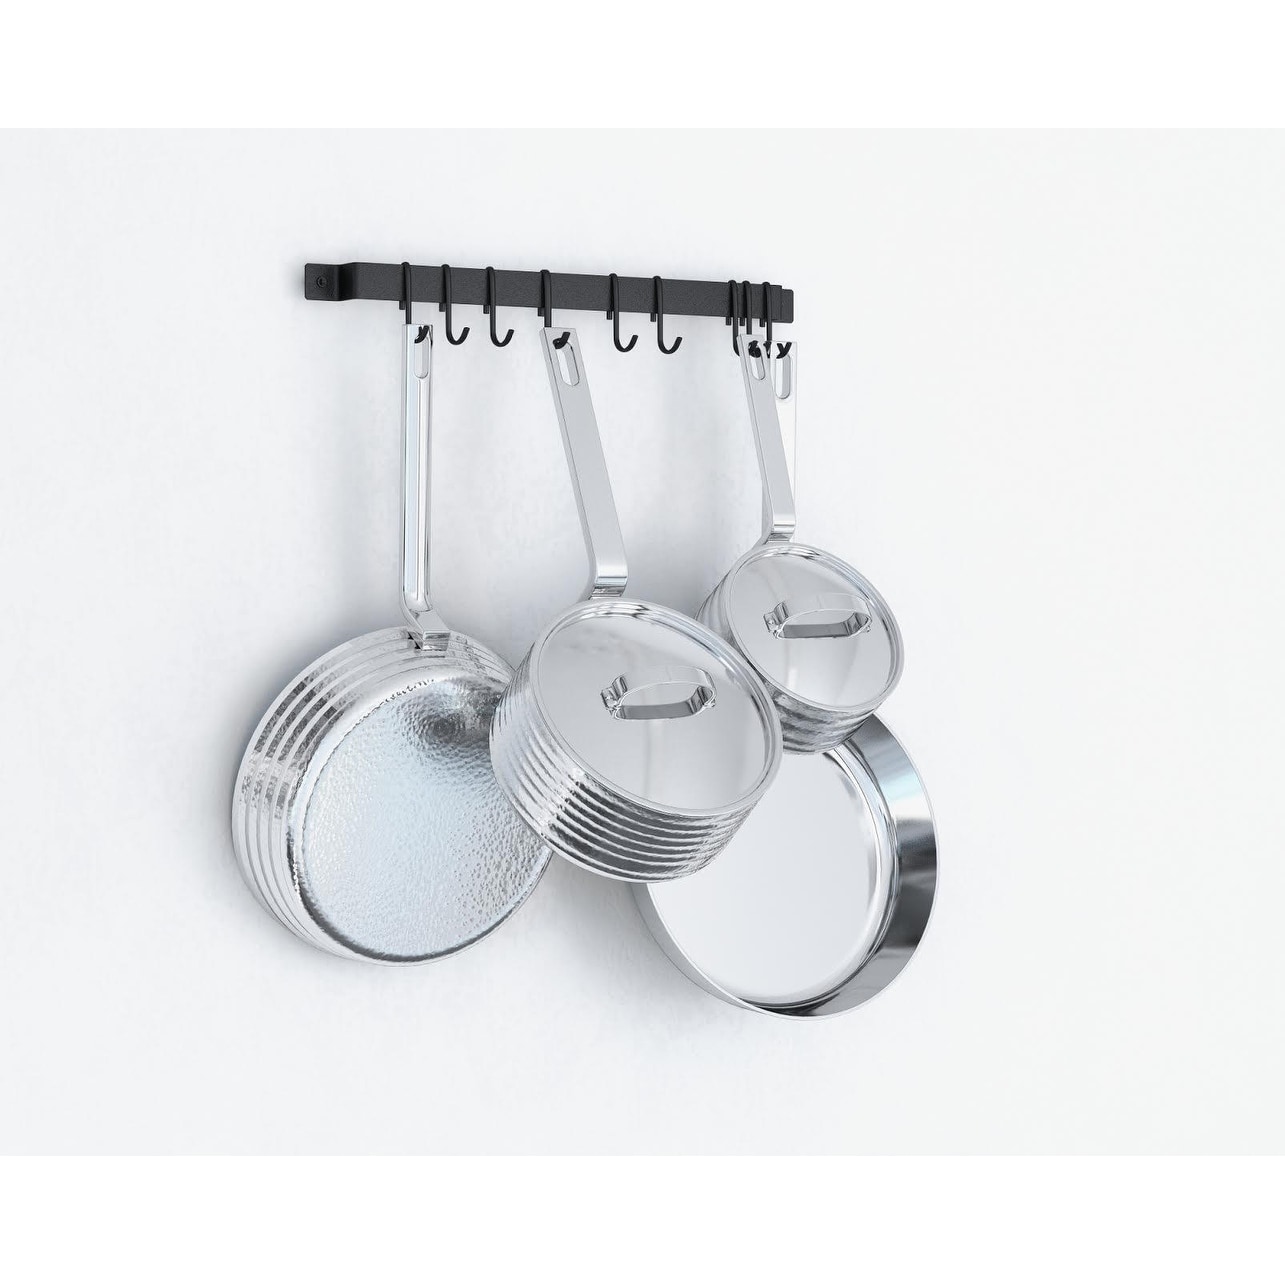 Sorbus Ceiling Mounted Pot Rack with Hooks ,Chrome